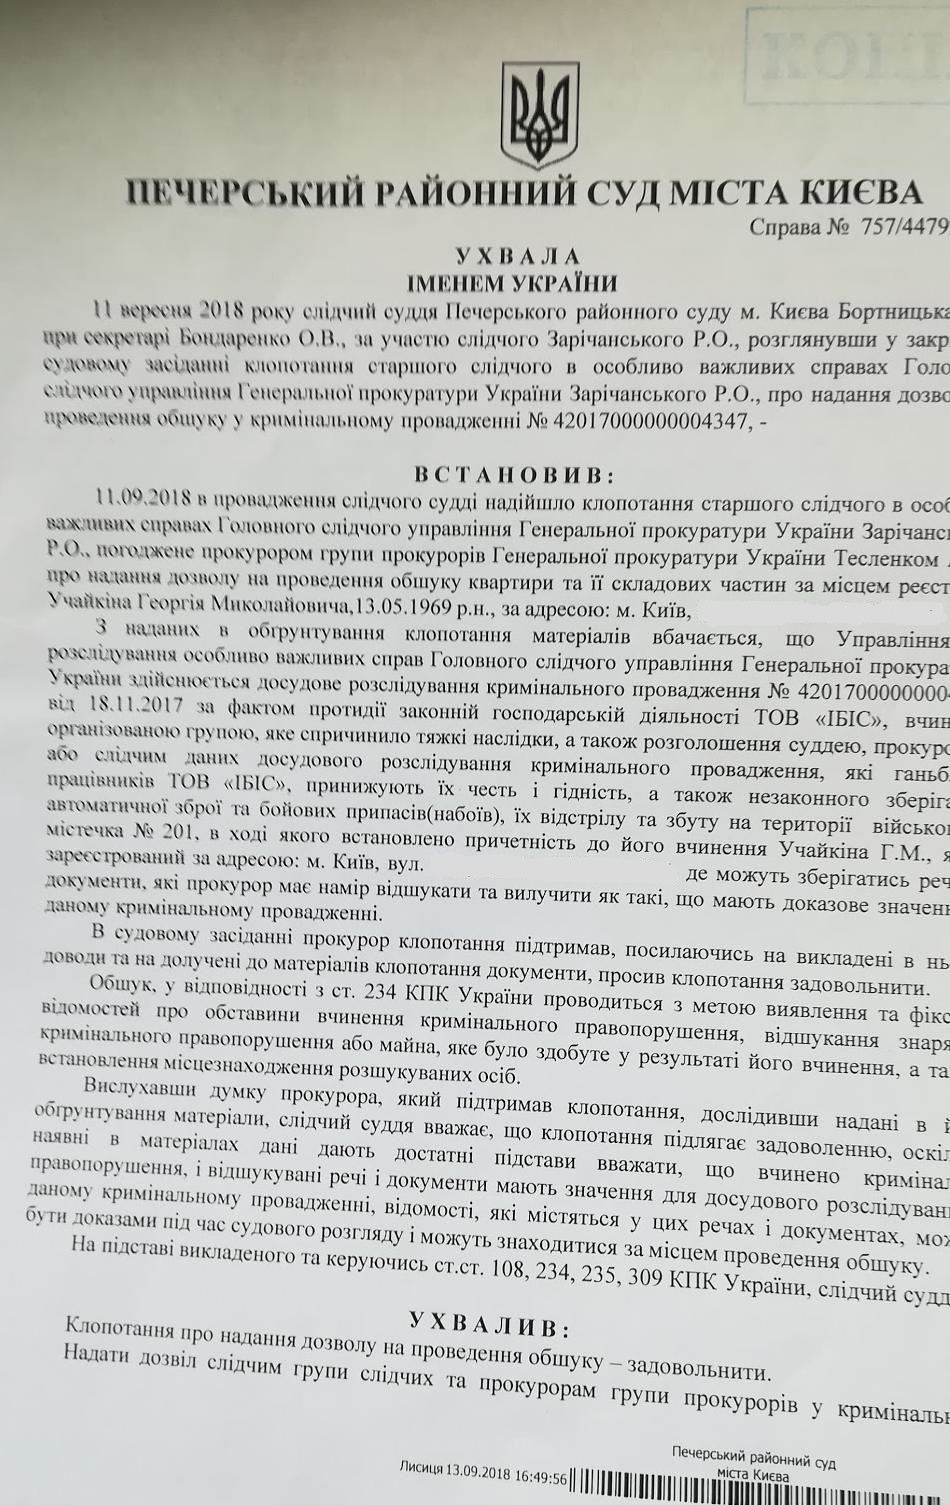 The decision of the Pechersk District Court